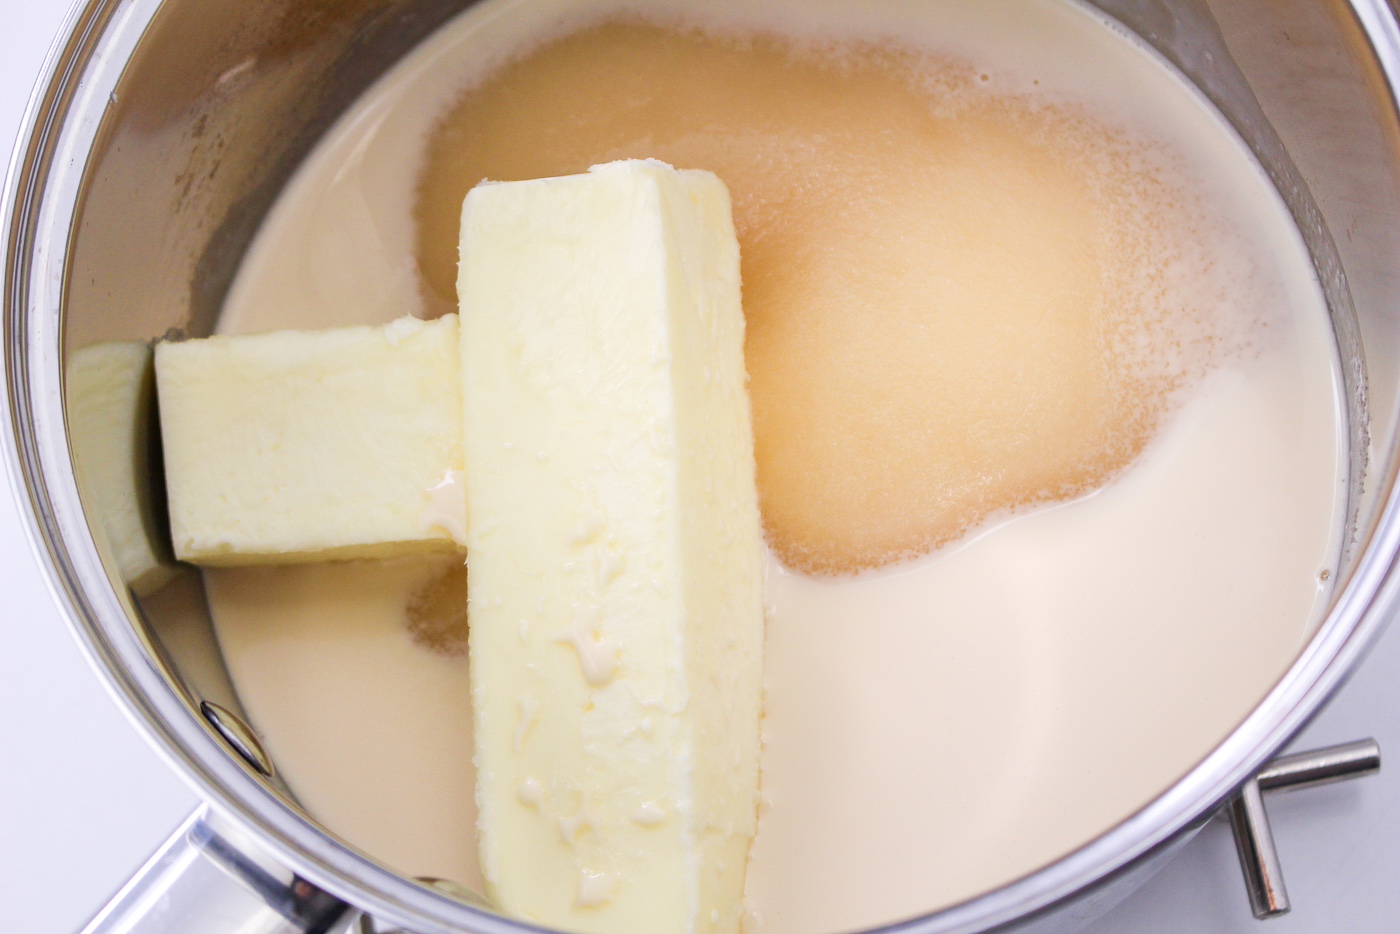 Butter, granulated sugar, and evaporated milk in a saucepan